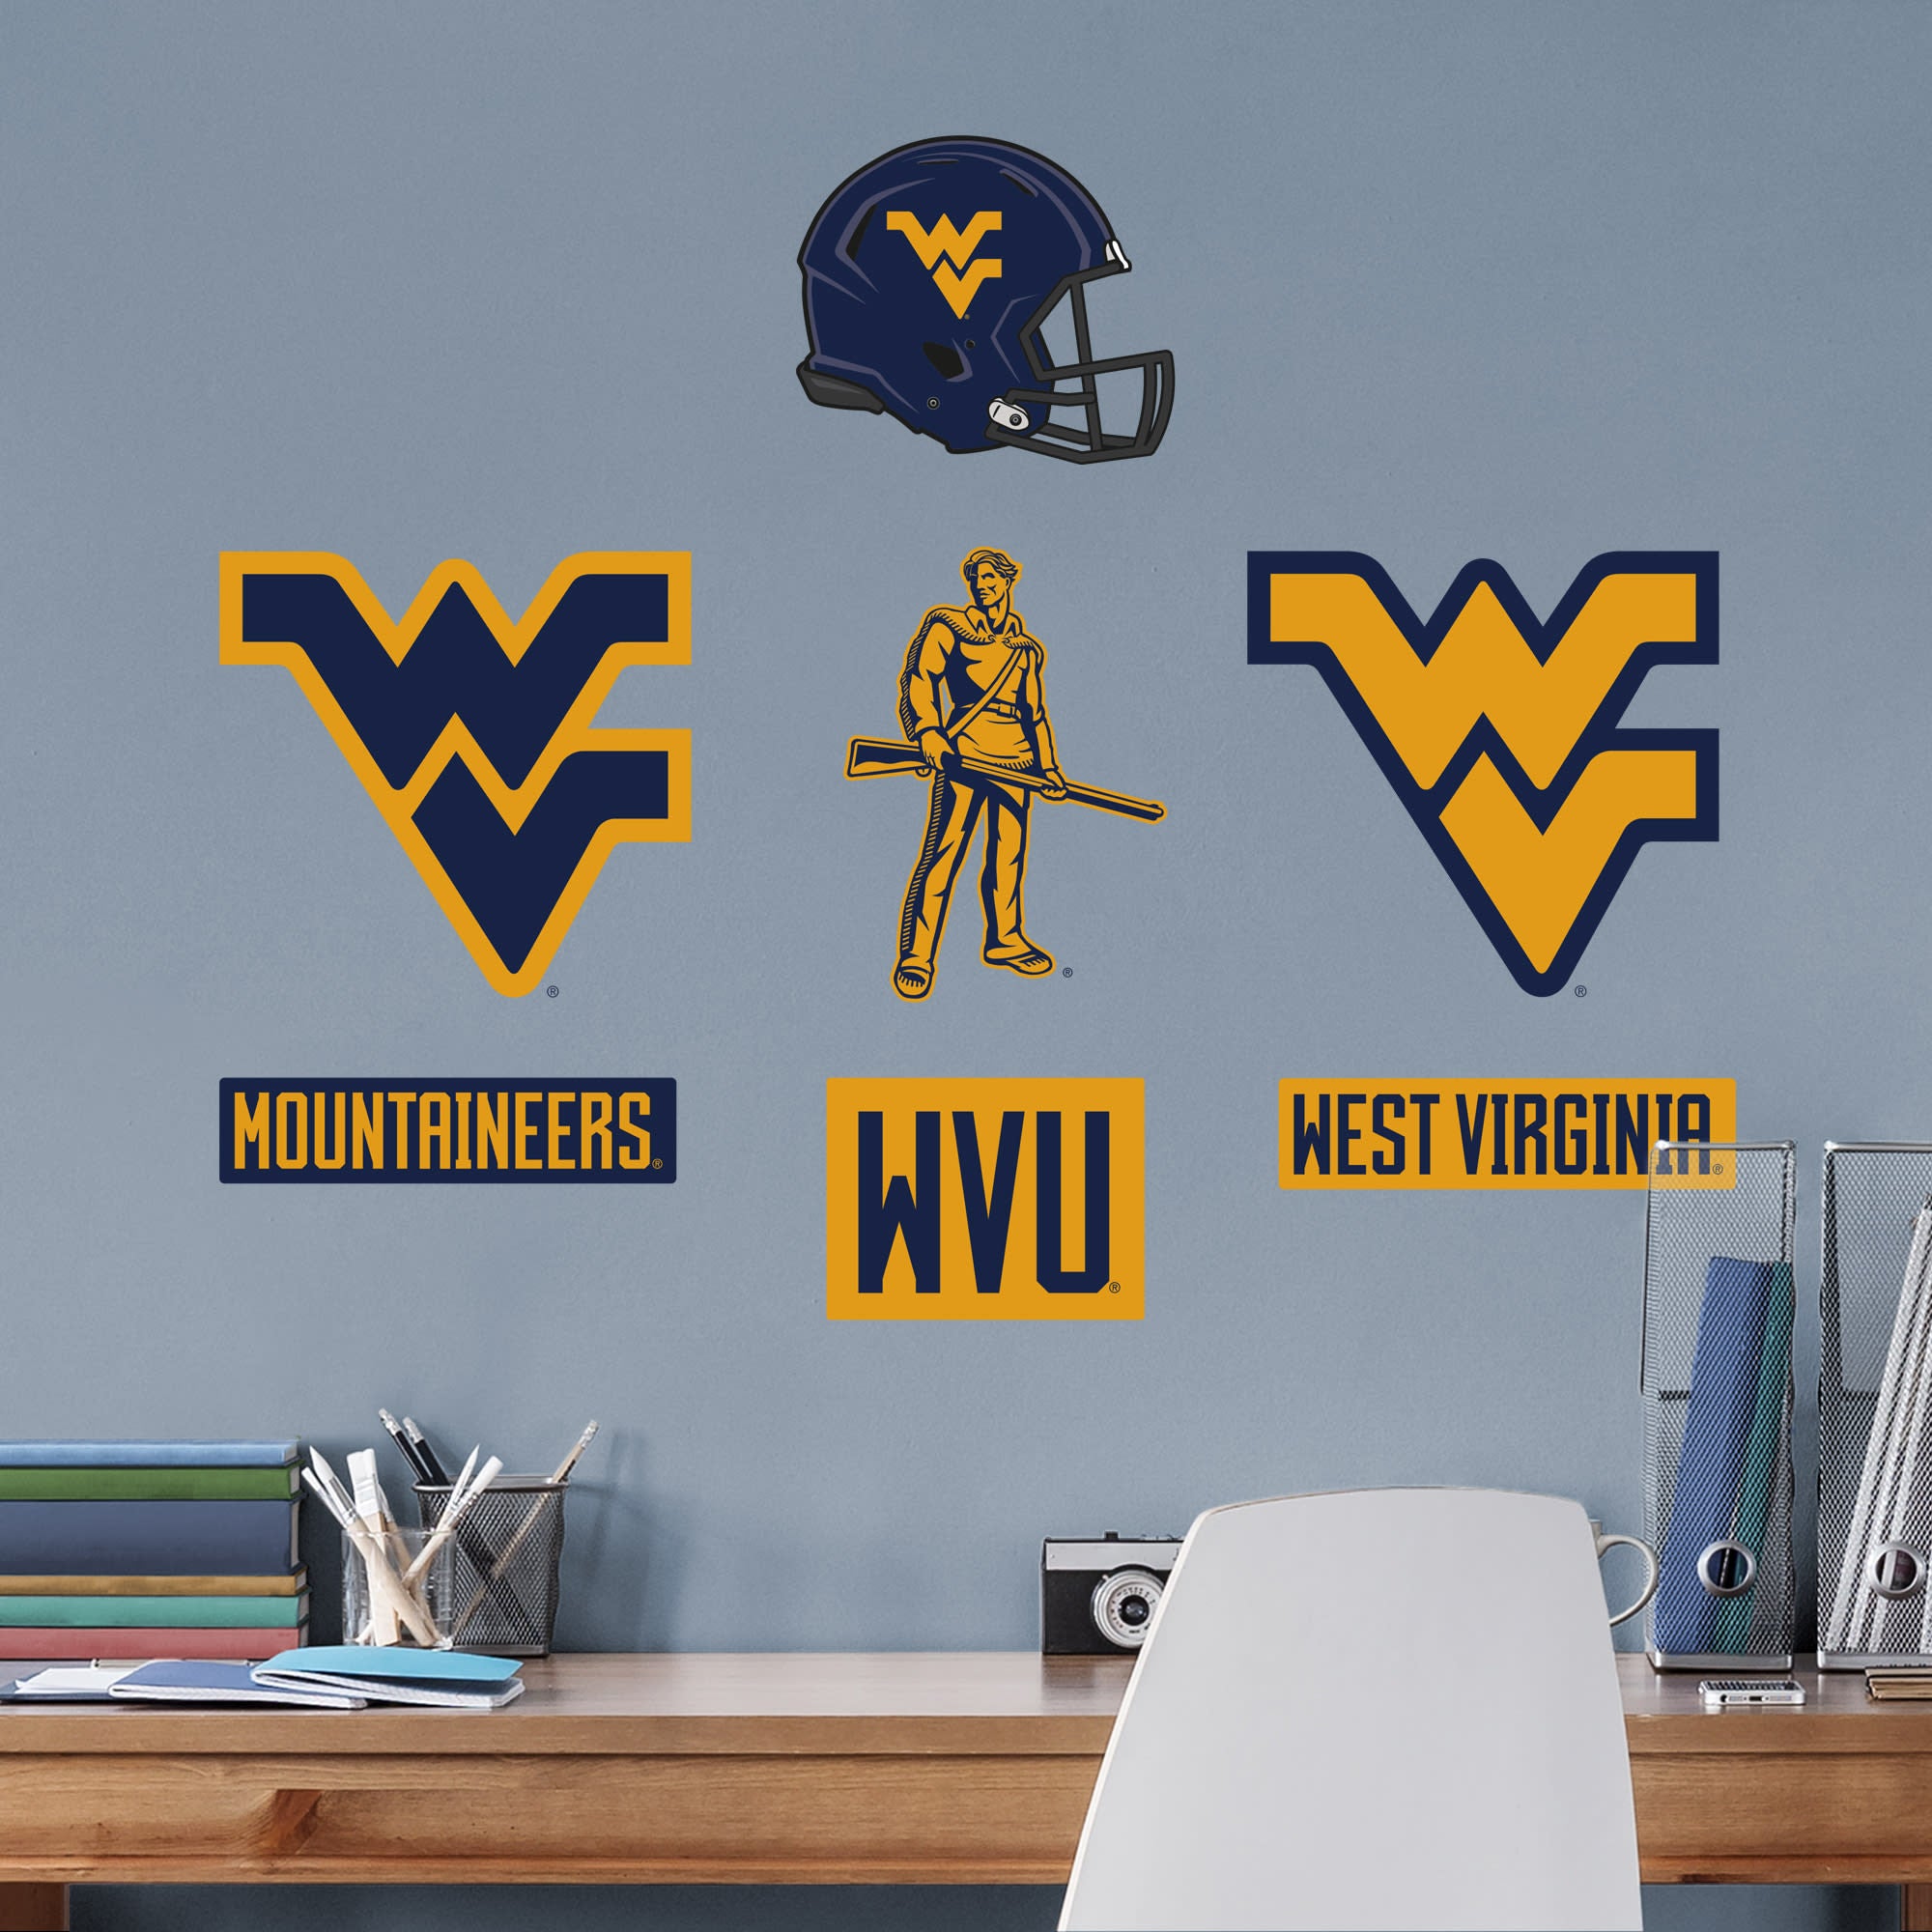 West Virginia Mountaineers: Logo Assortment - Officially Licensed Removable Wall Decals 12.1"W x 9.6"H by Fathead | Vinyl